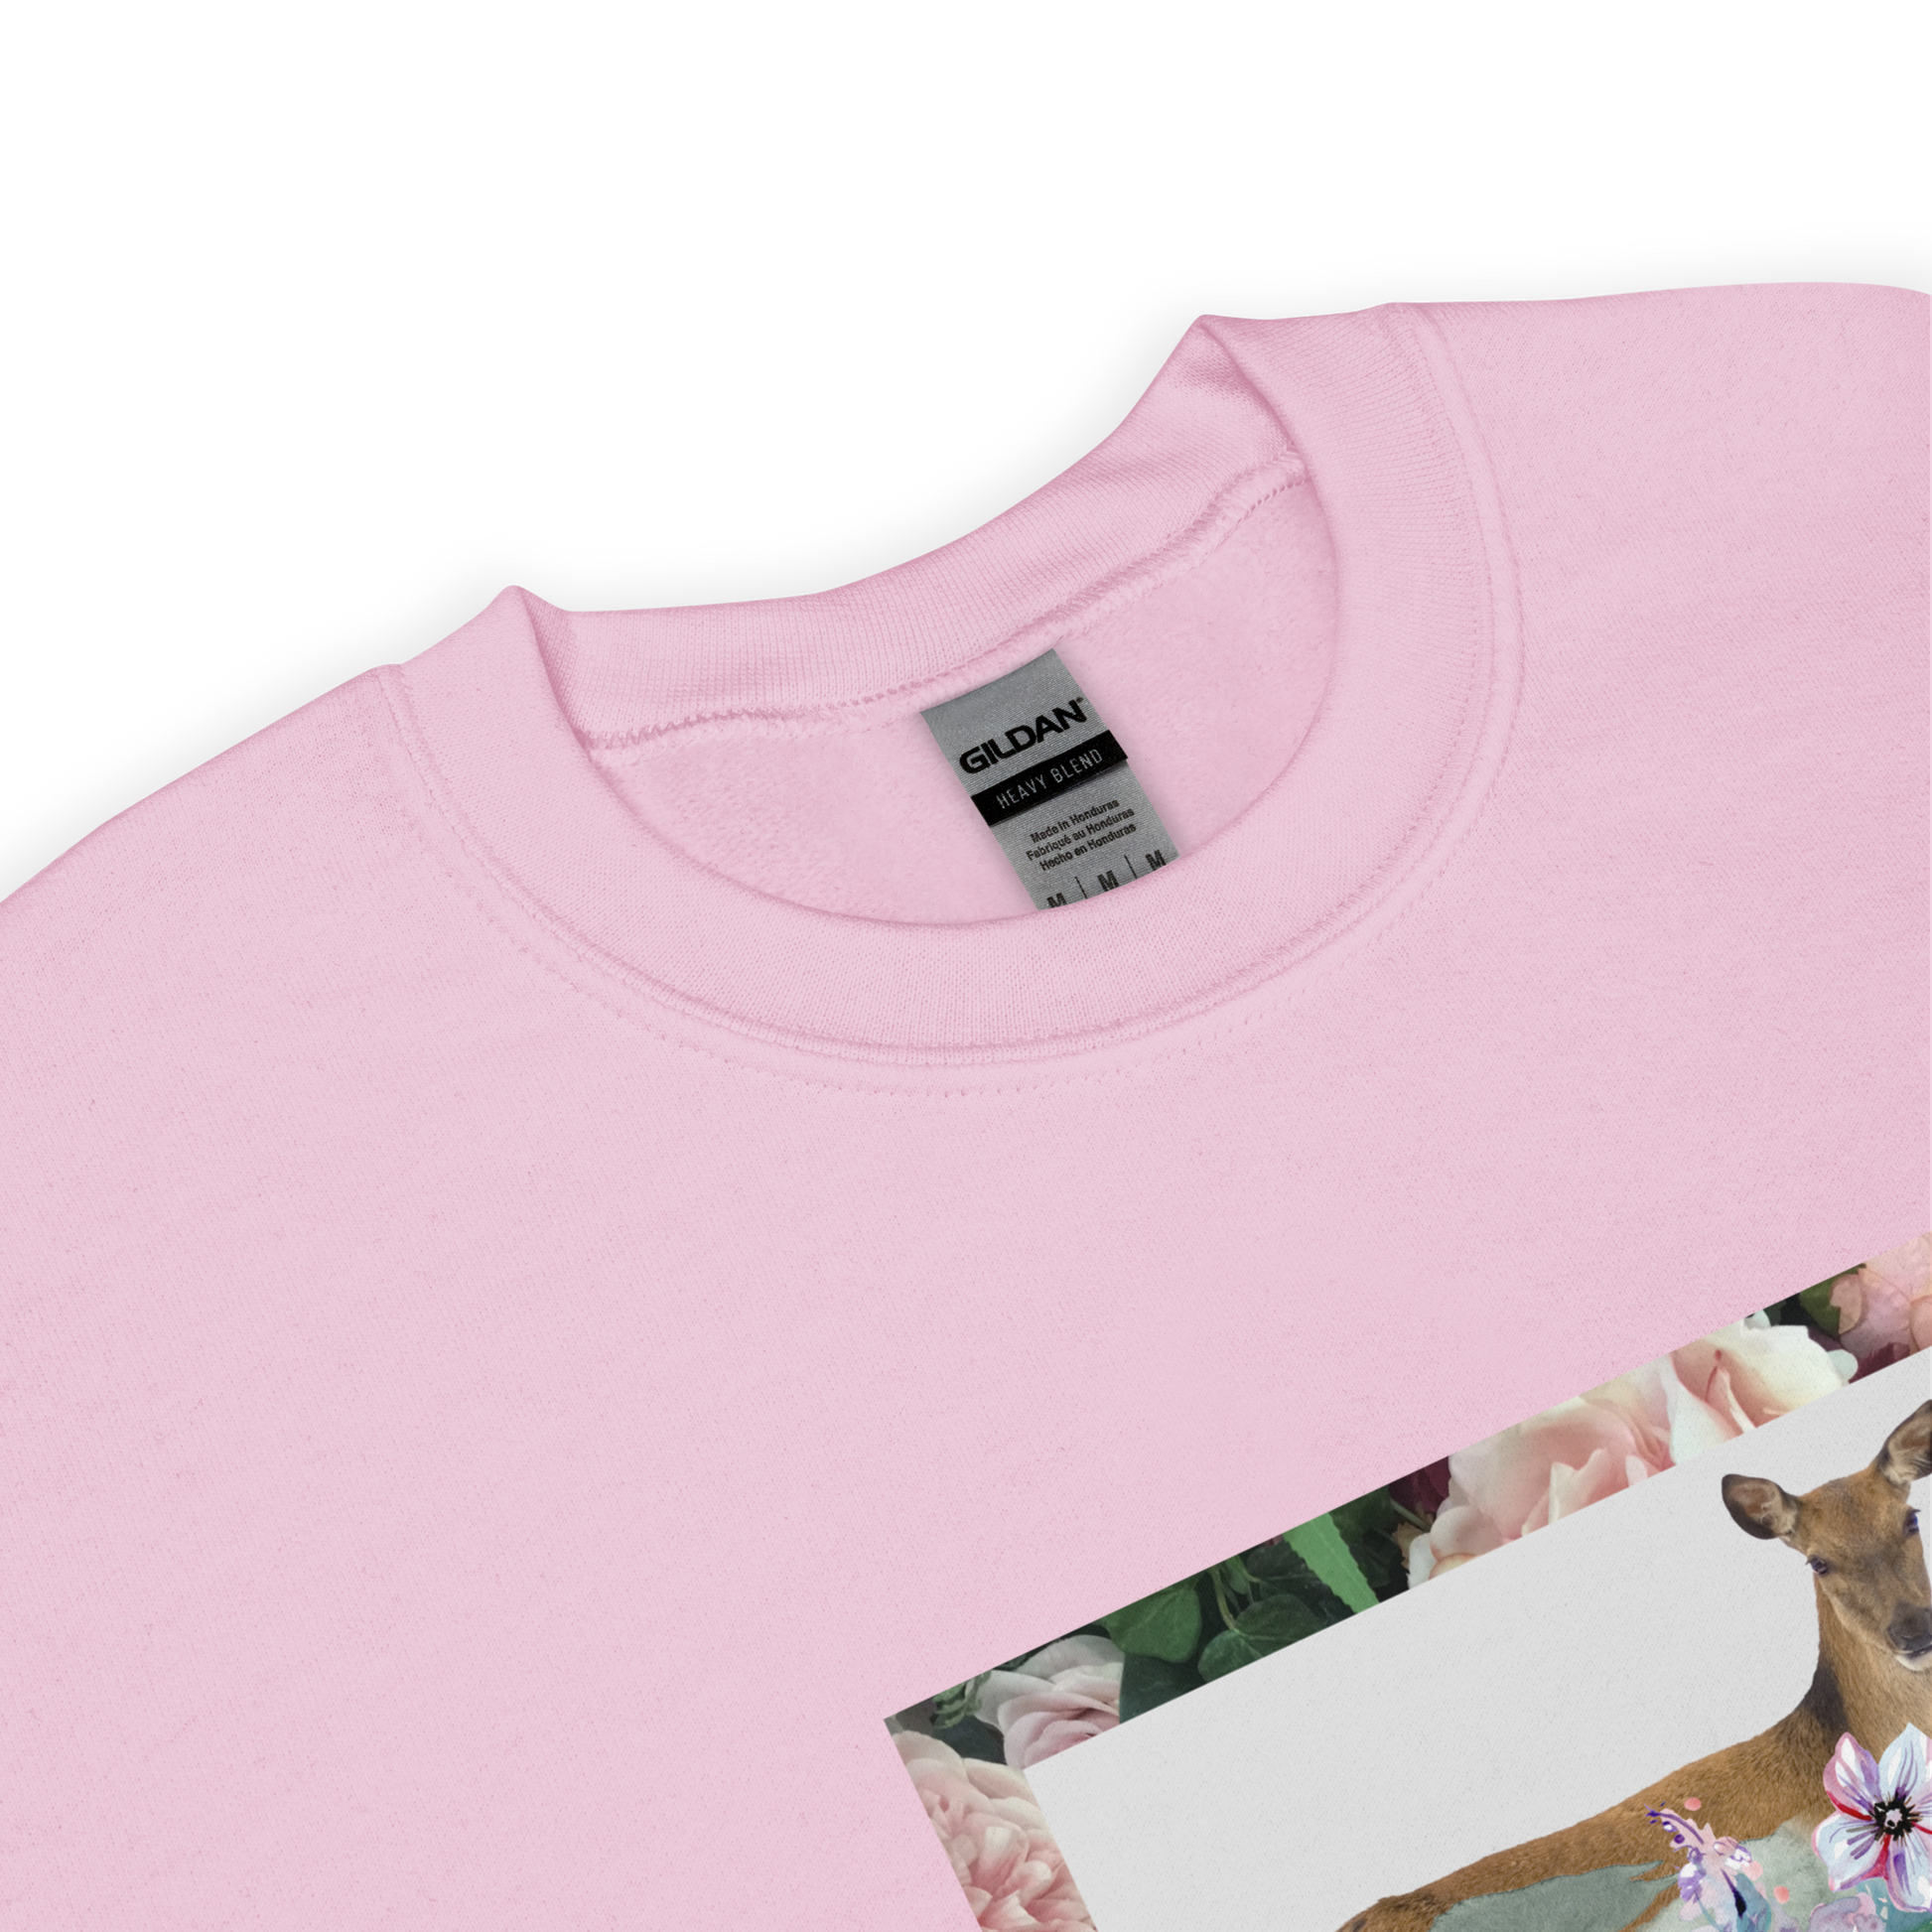 Front Details of a Light Pink Floral Deer Sweatshirt featuring a beautifully detailed vibrant Floral Deer graphic on the chest - Cute Graphic Deer Sweatshirts - Boozy Fox